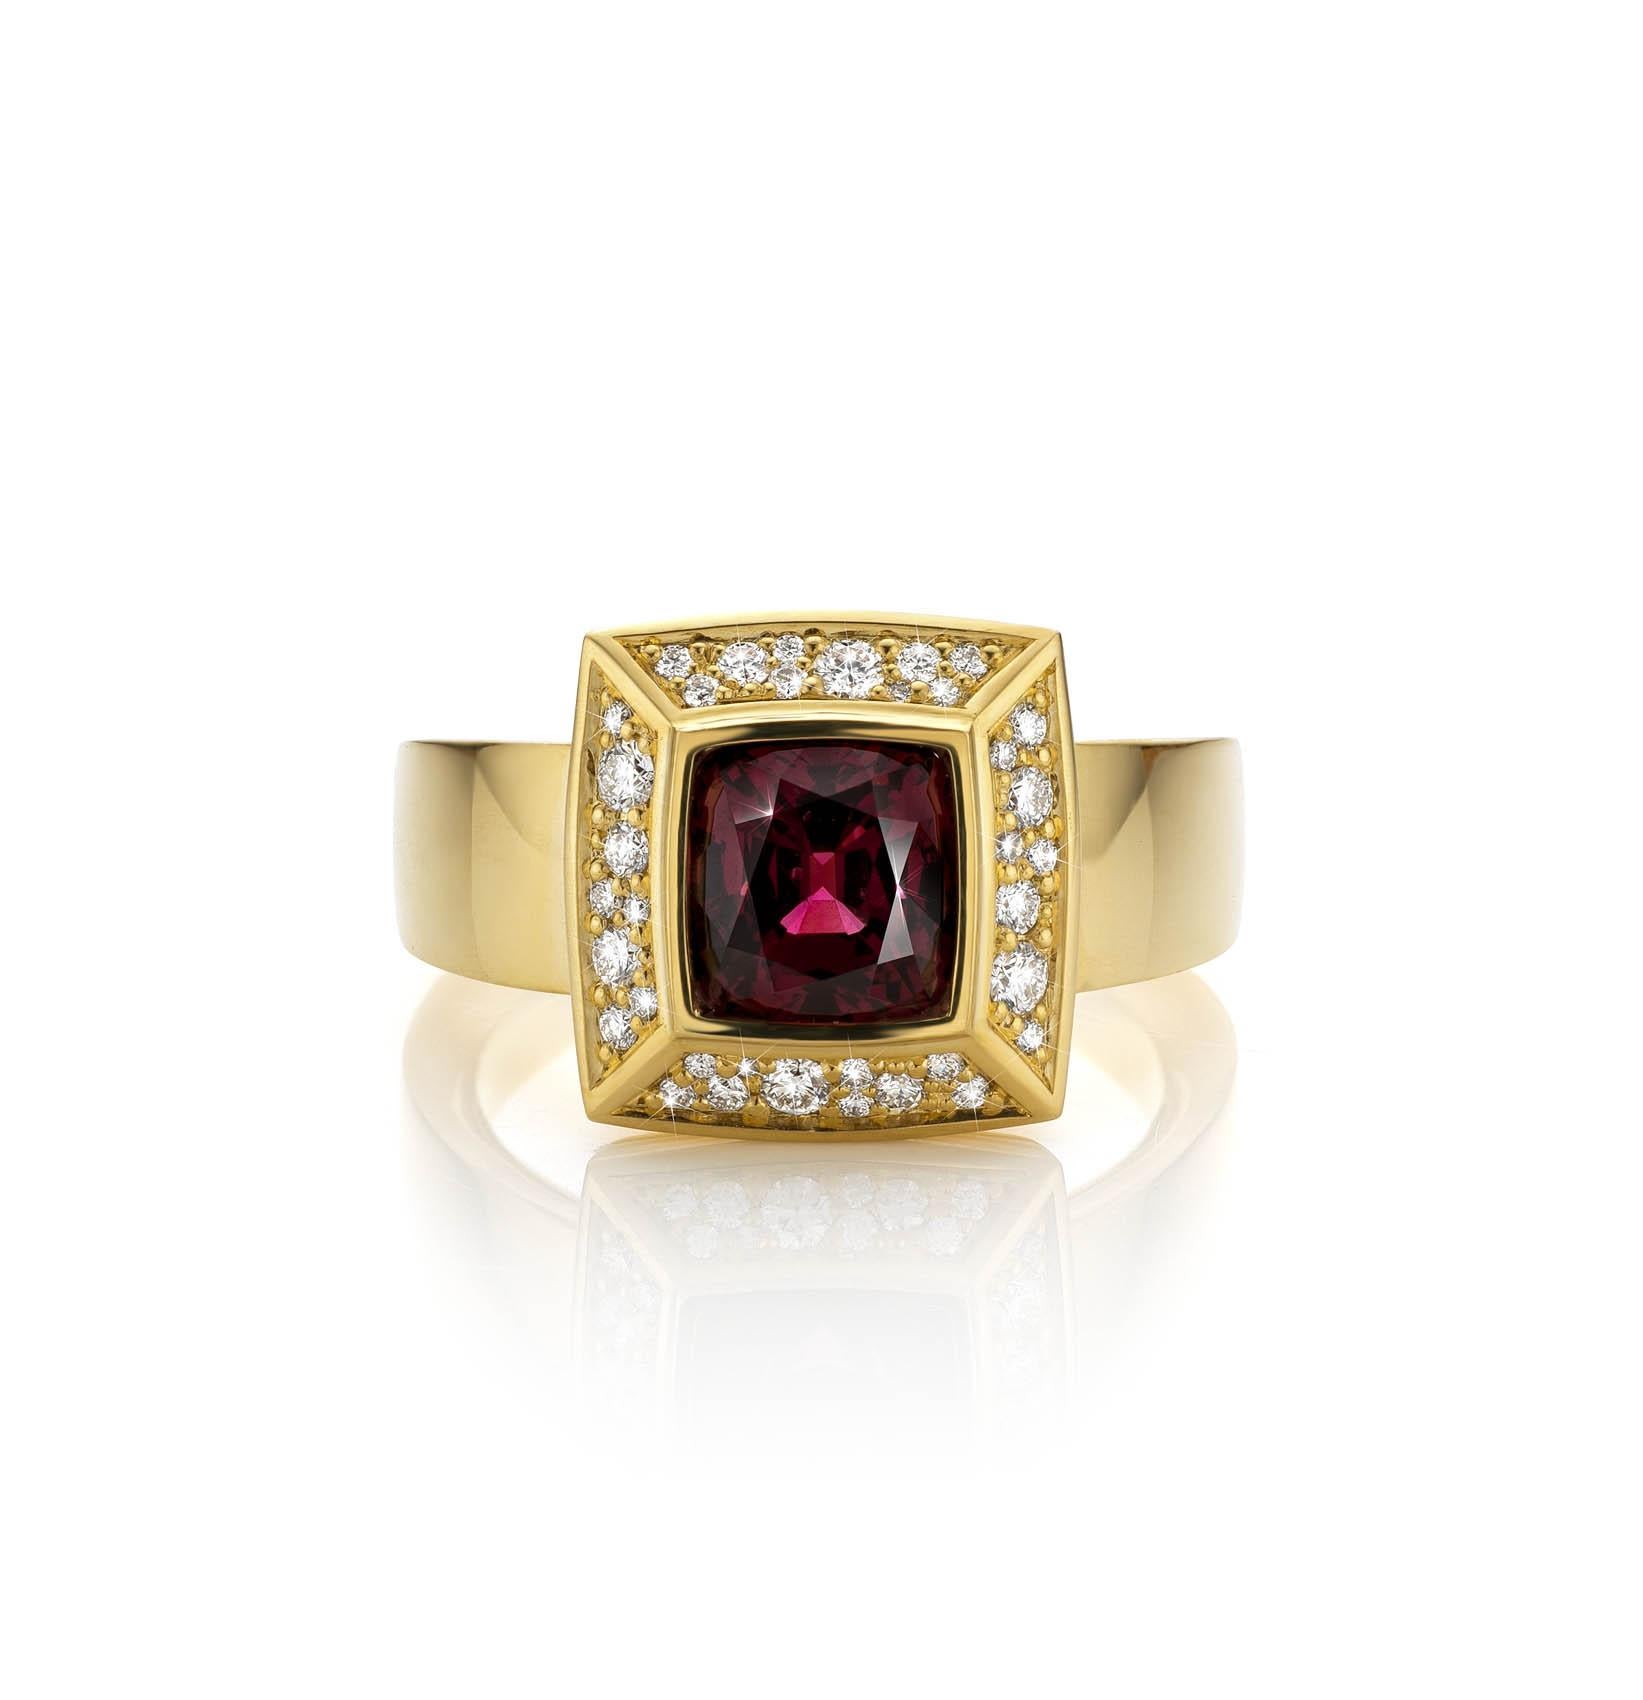 Contemporary Cober “Balas Cushion” 2.37 Carat Deep Red Spinel & 0.36 Ct Diamonds Ring   For Sale